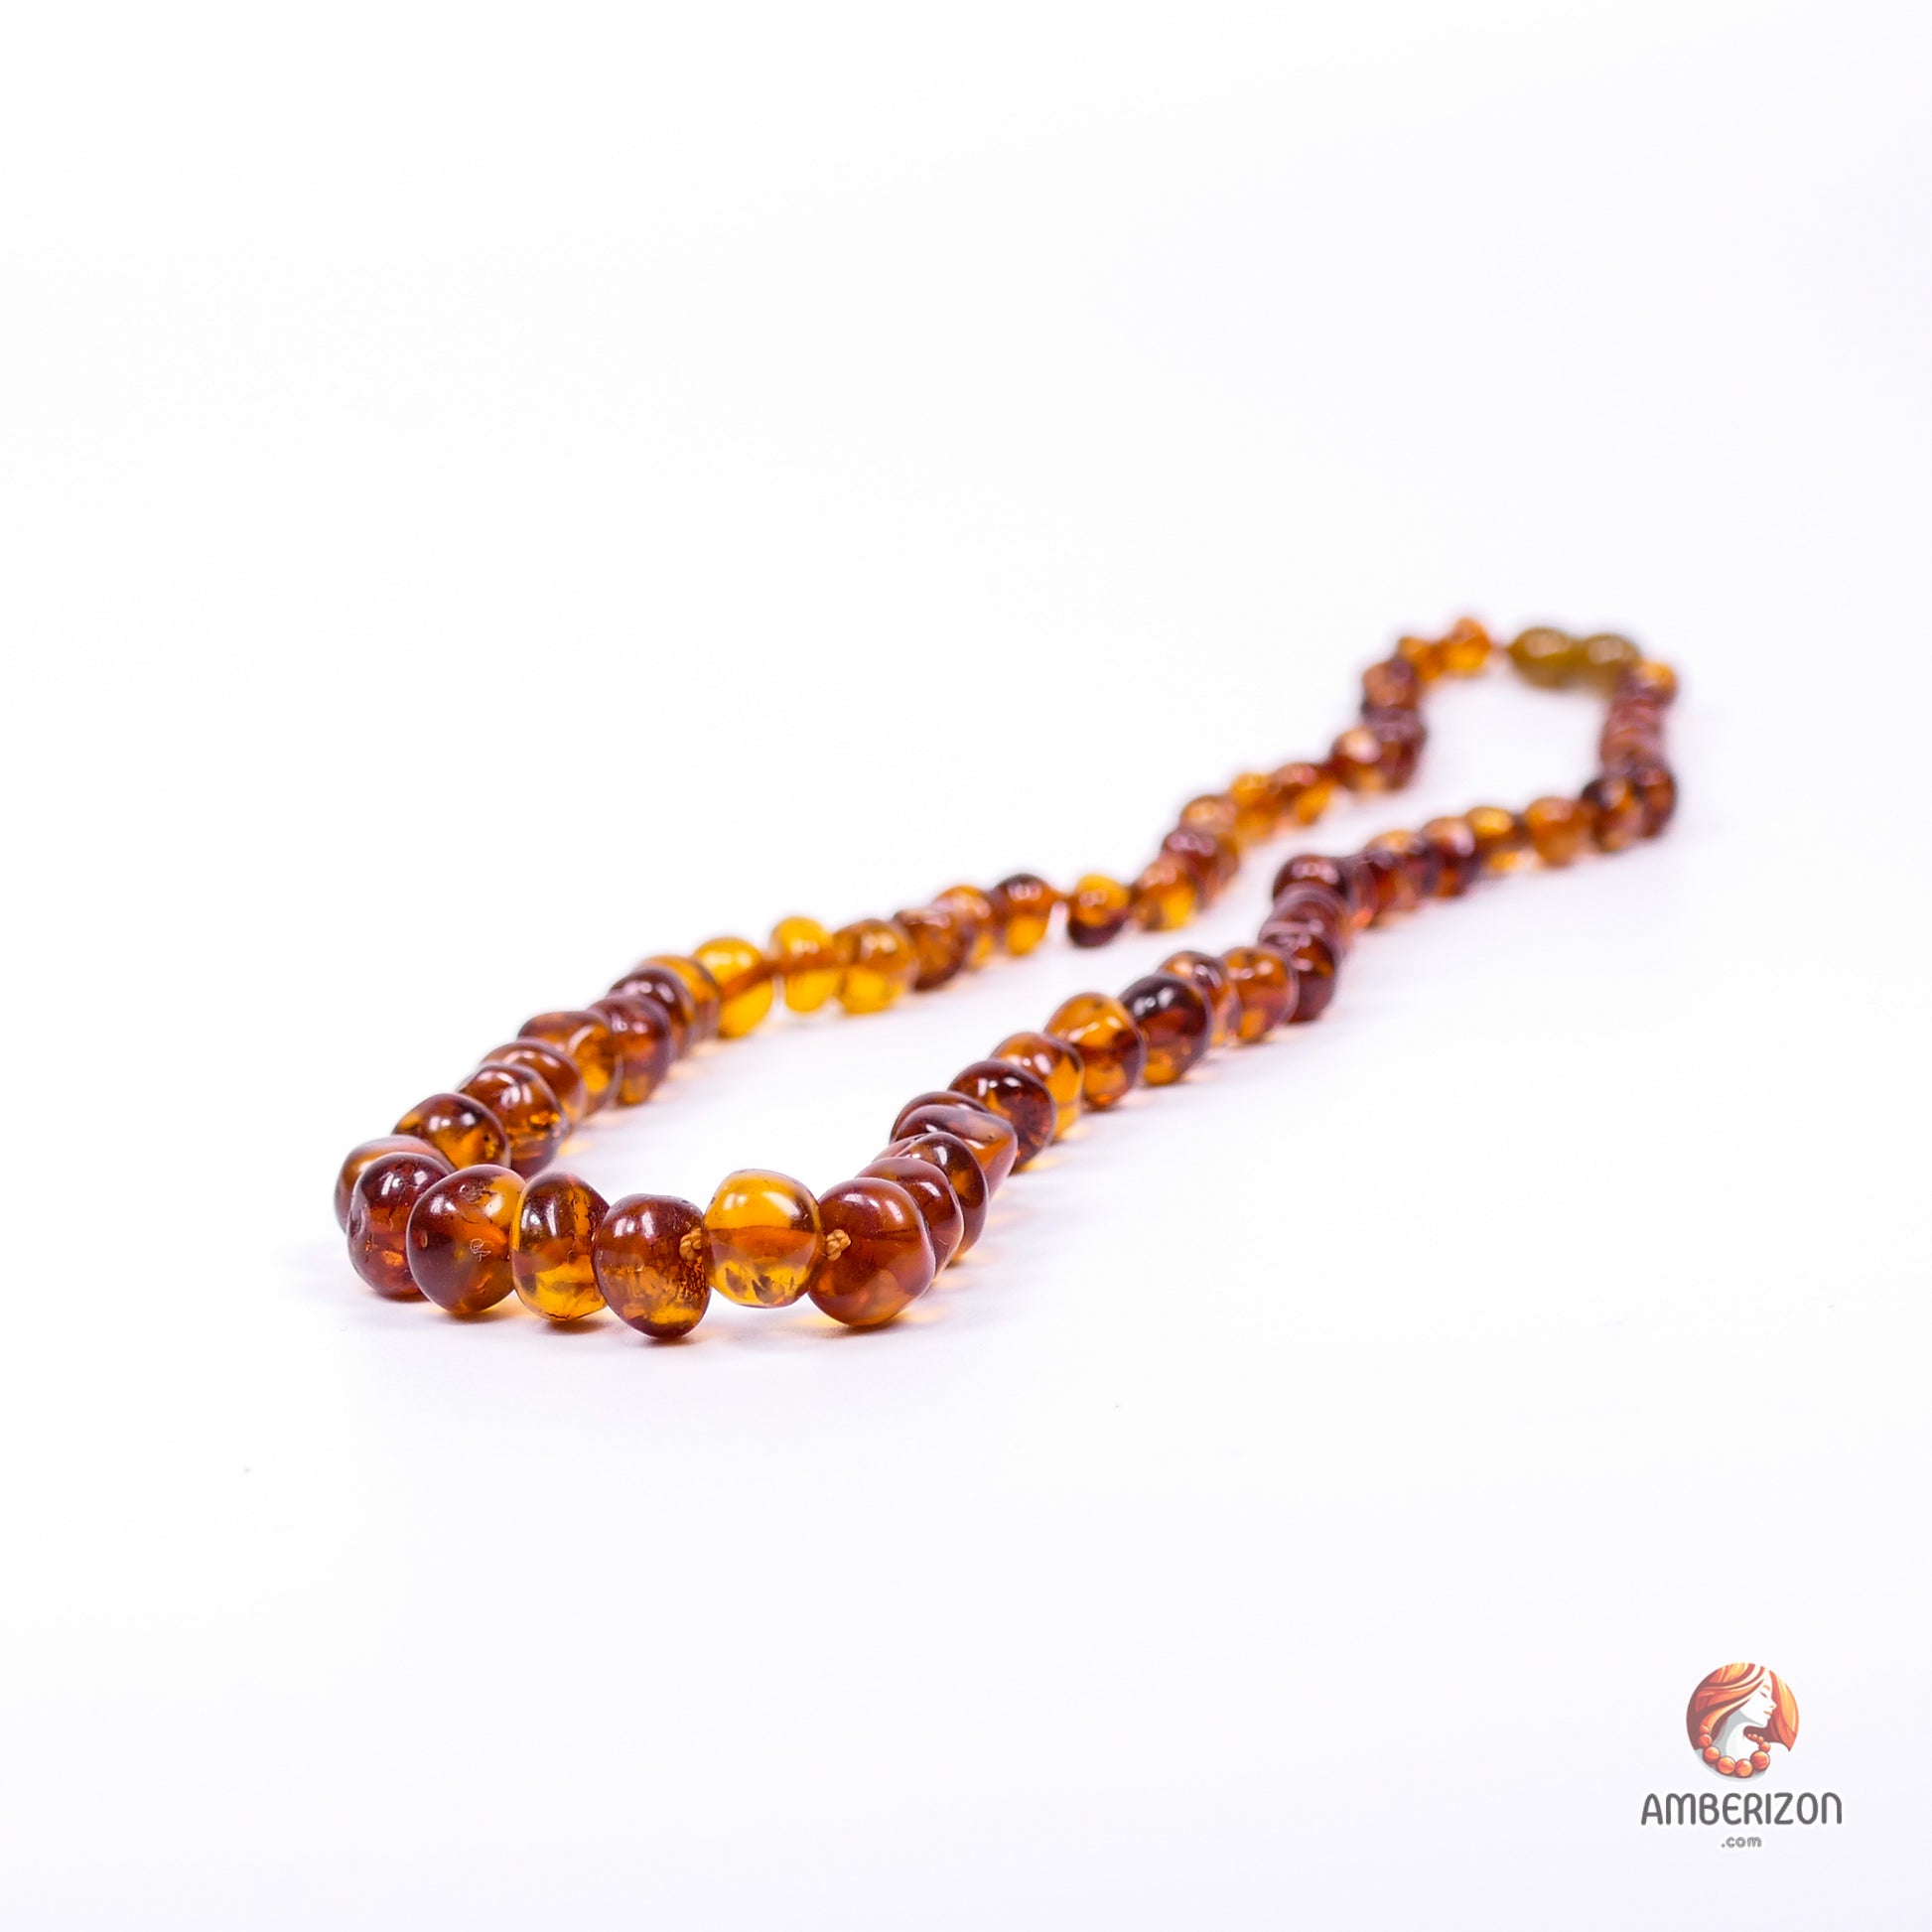 Certified Adult Baltic Amber Necklace - Glossy Finish - Twist Barrel Clasp